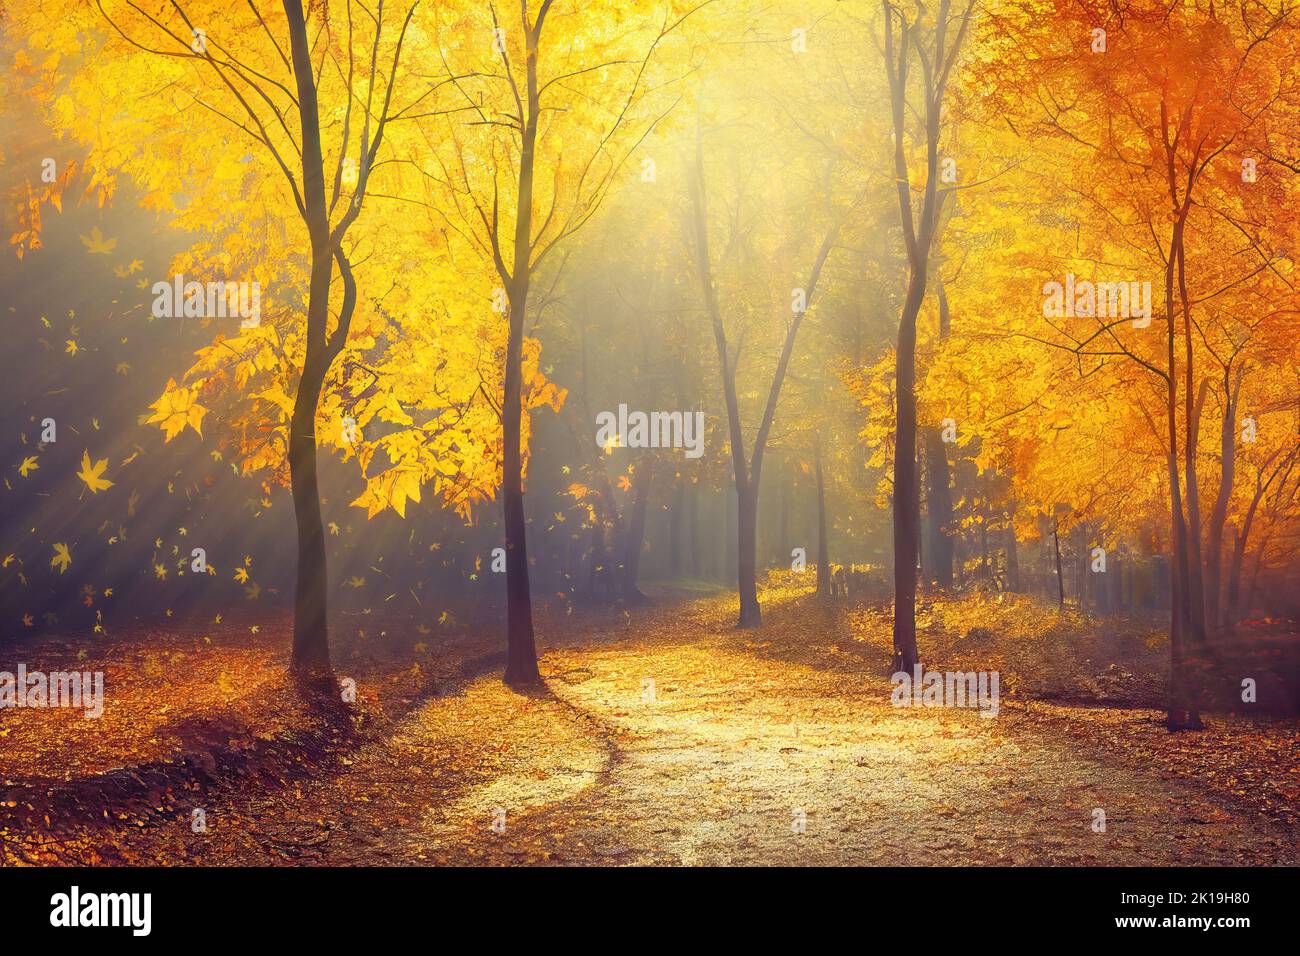 Falling leaves in autumn park, yellow and red maple trees along a sunlit alley. Digital illustration based on render by neural network Stock Photo